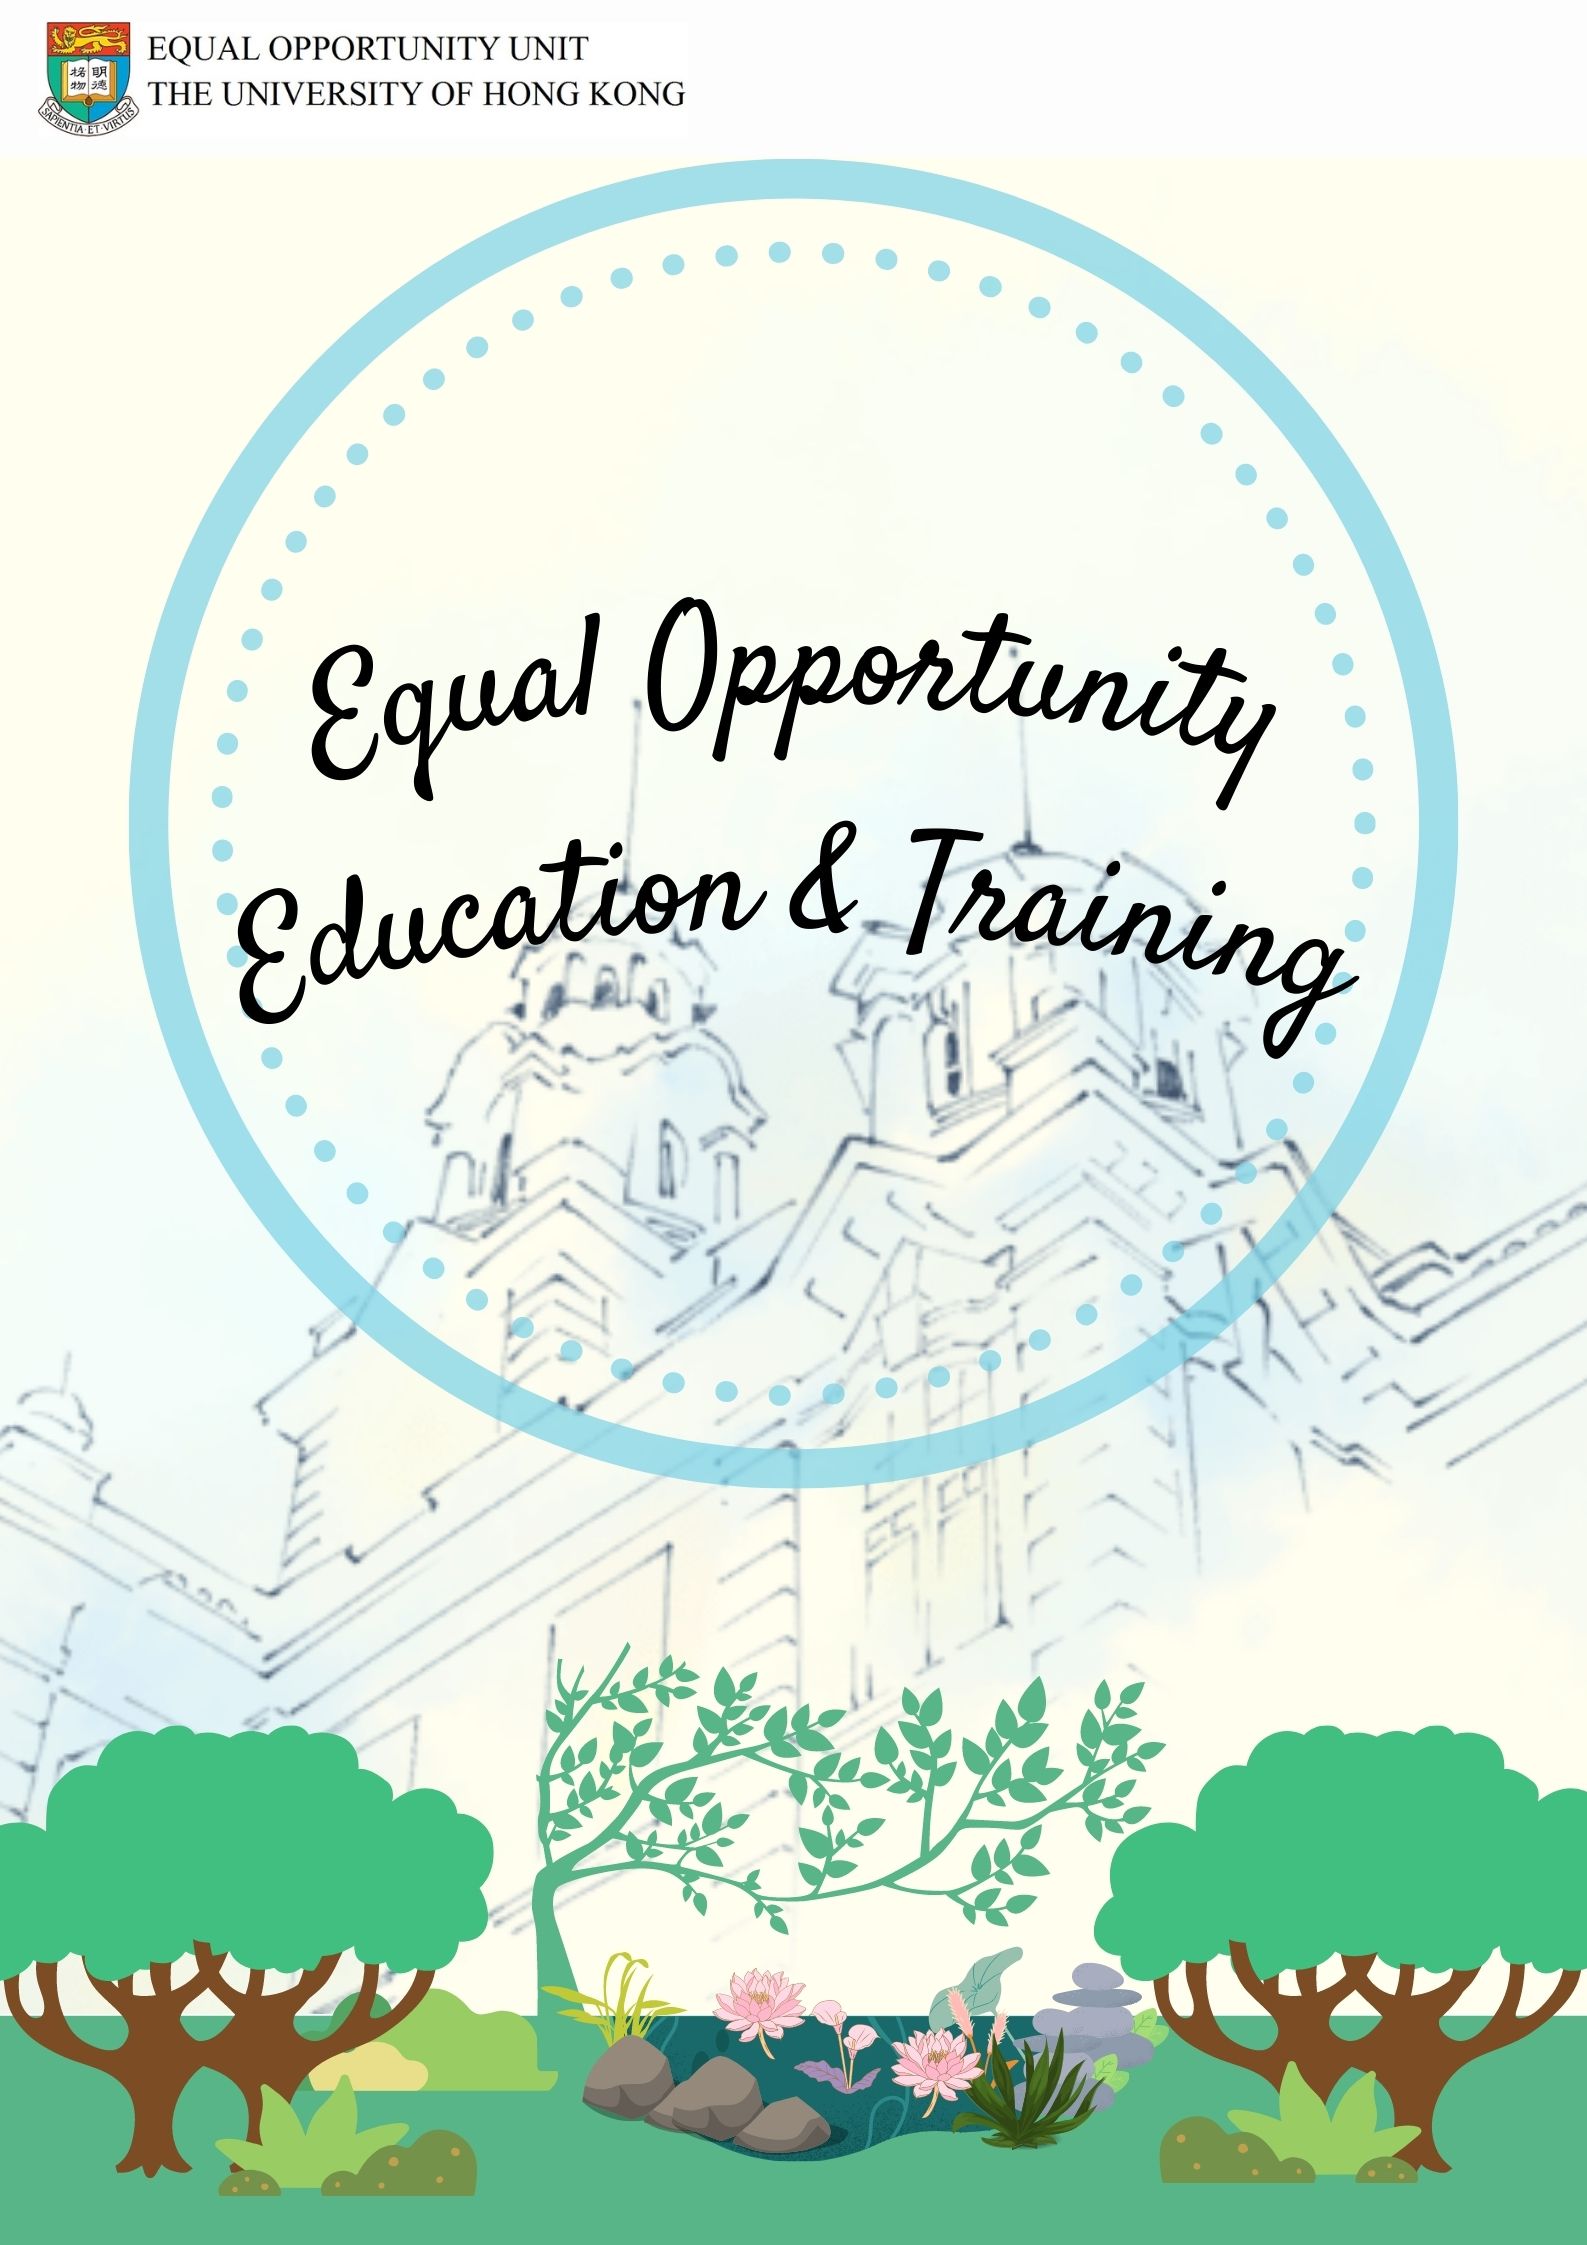 Training for Equal Opportunity Student Ambassadors 2020-21 Poster. Content same as text on this webpage.